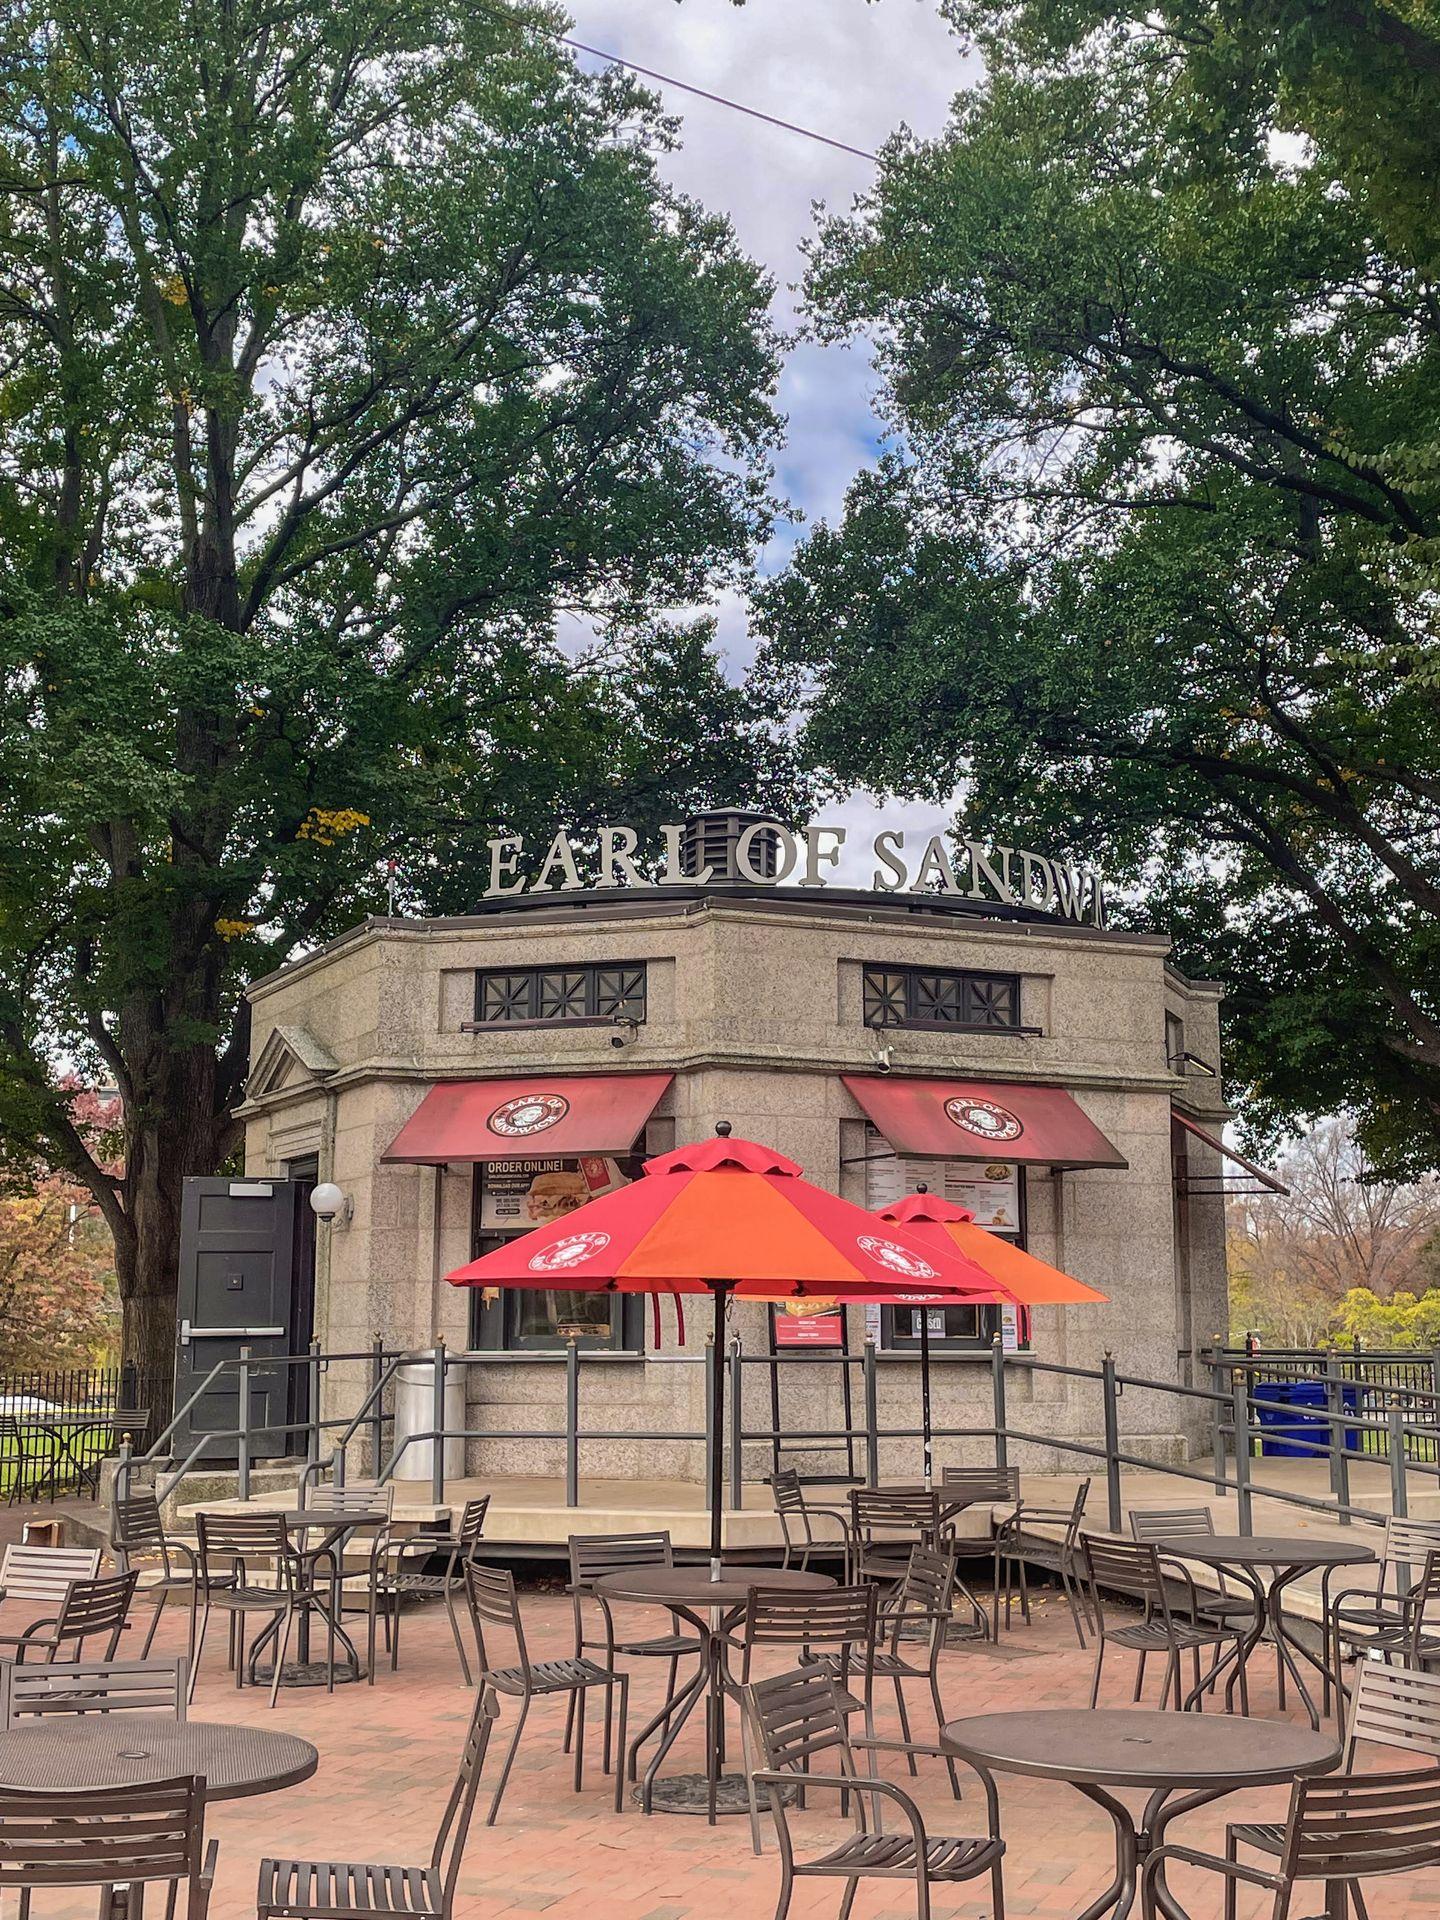 The Earl of Sandwich restaurant inside of Boston Common. There are tables outside of hte building with red and orange umbrellas.